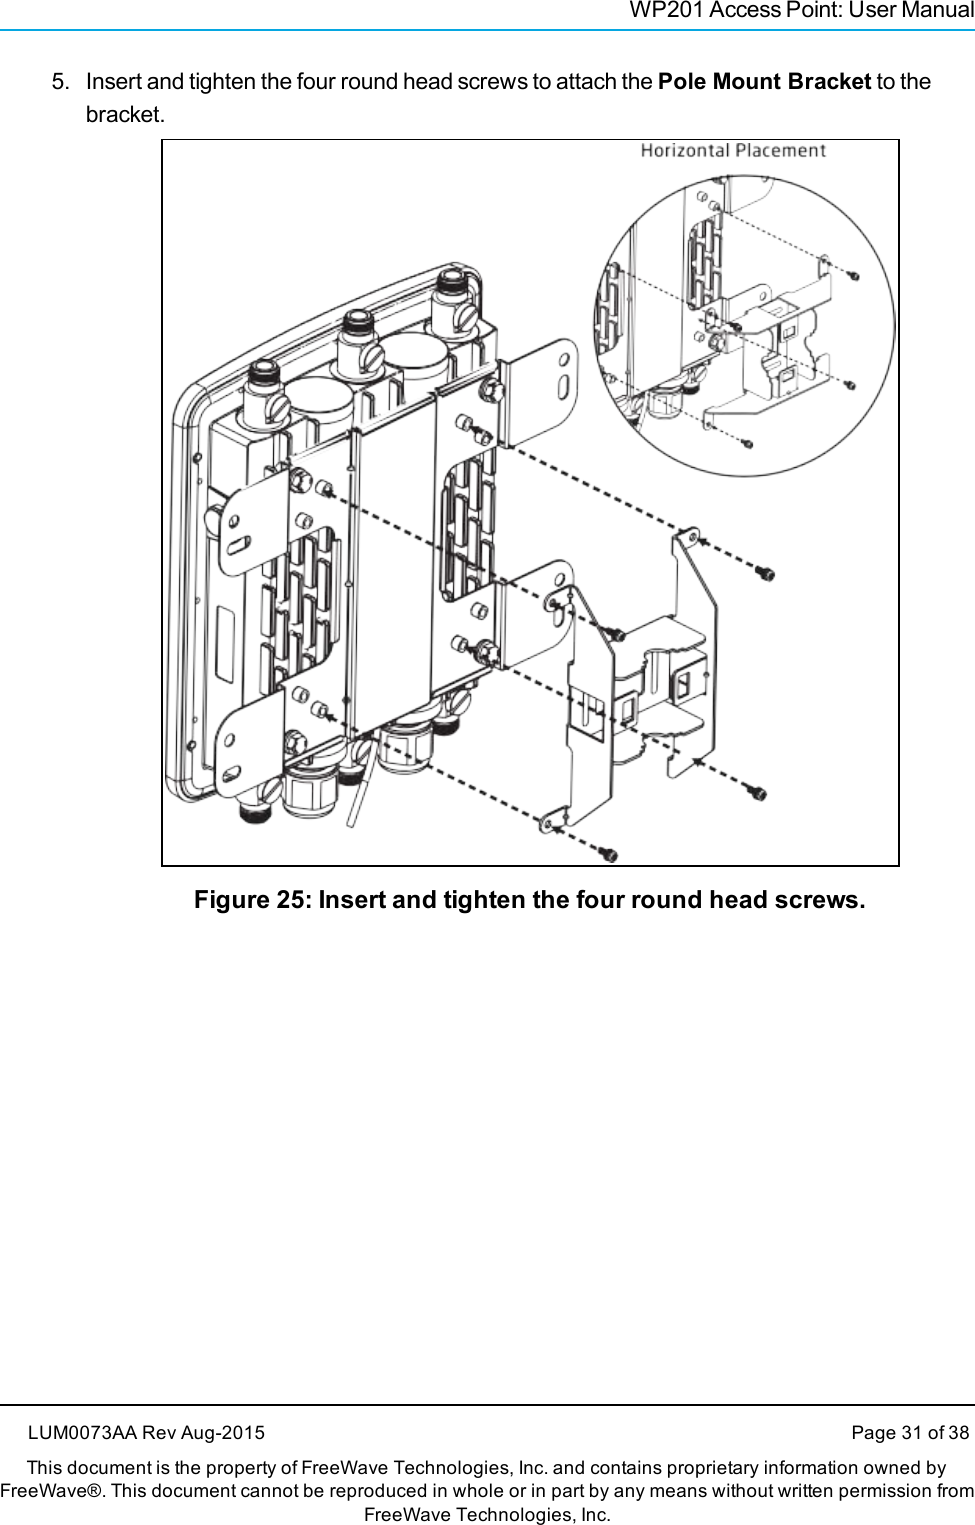 WP201 Access Point: User Manual5. Insert and tighten the four round head screws to attach the Pole Mount Bracket to thebracket.Figure 25: Insert and tighten the four round head screws.LUM0073AA Rev Aug-2015 Page 31 of 38This document is the property of FreeWave Technologies, Inc. and contains proprietary information owned byFreeWave®. This document cannot be reproduced in whole or in part by any means without written permission fromFreeWave Technologies, Inc.